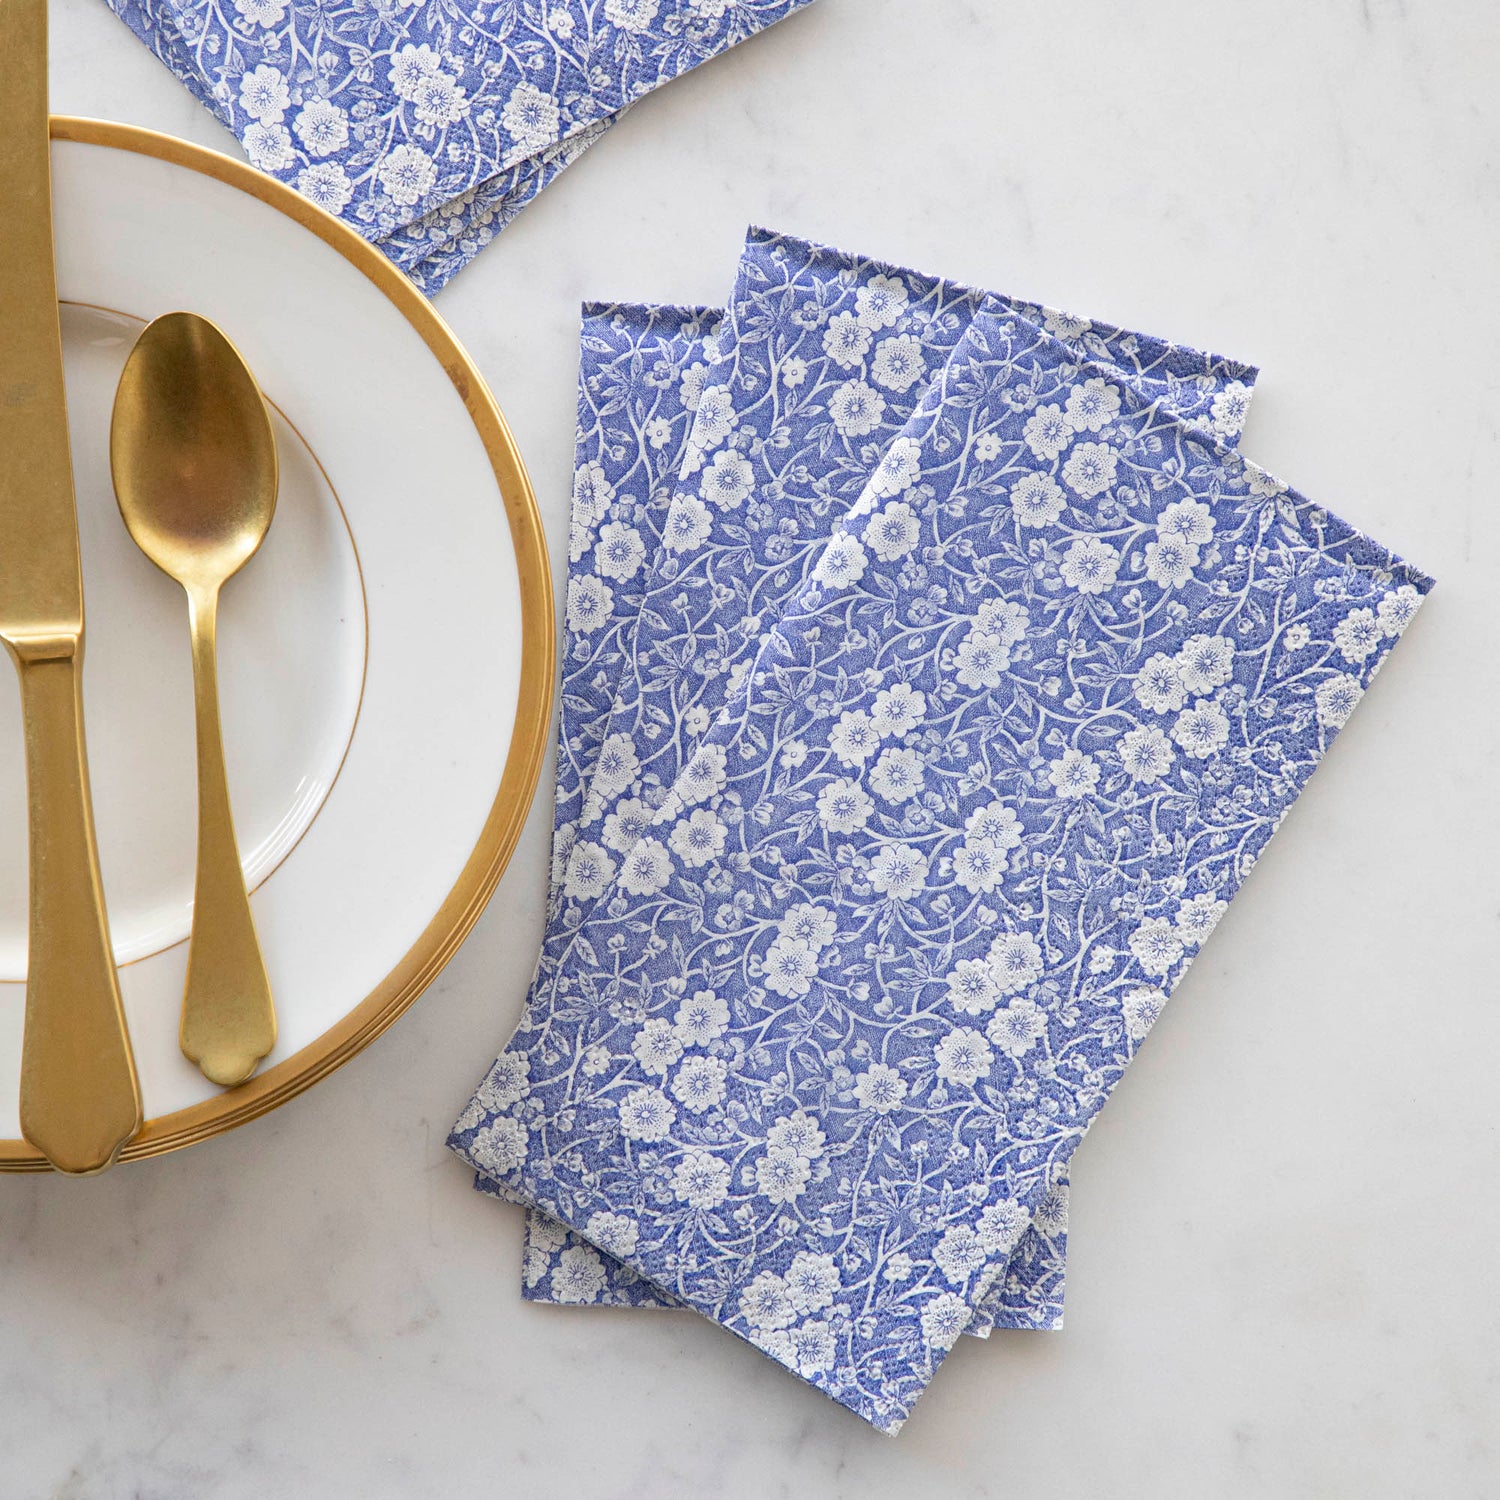 A set of beautiful Blue Calico Napkins by Hester &amp; Cook, exquisitely decorated with a gold spoon.